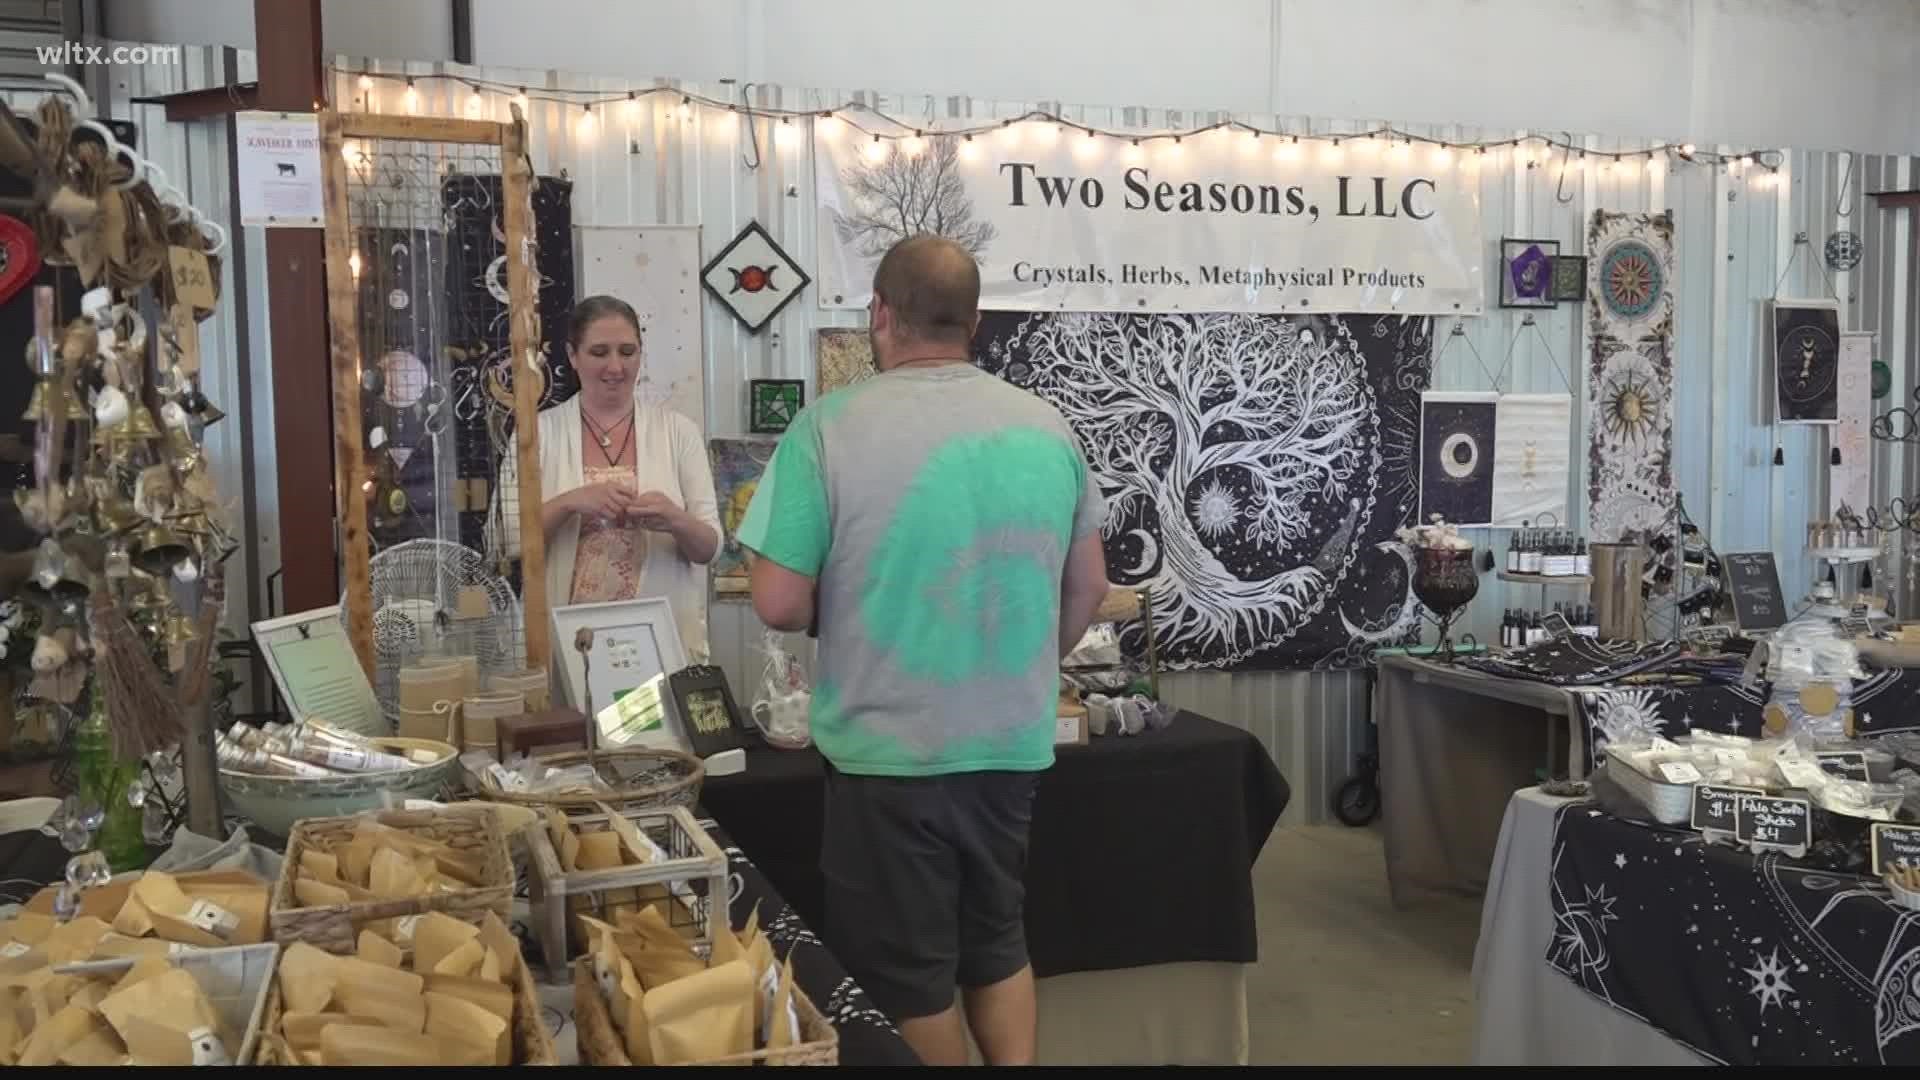 The Sumter craft and food event has been taking place on other days, but now is expanding into the weekend.